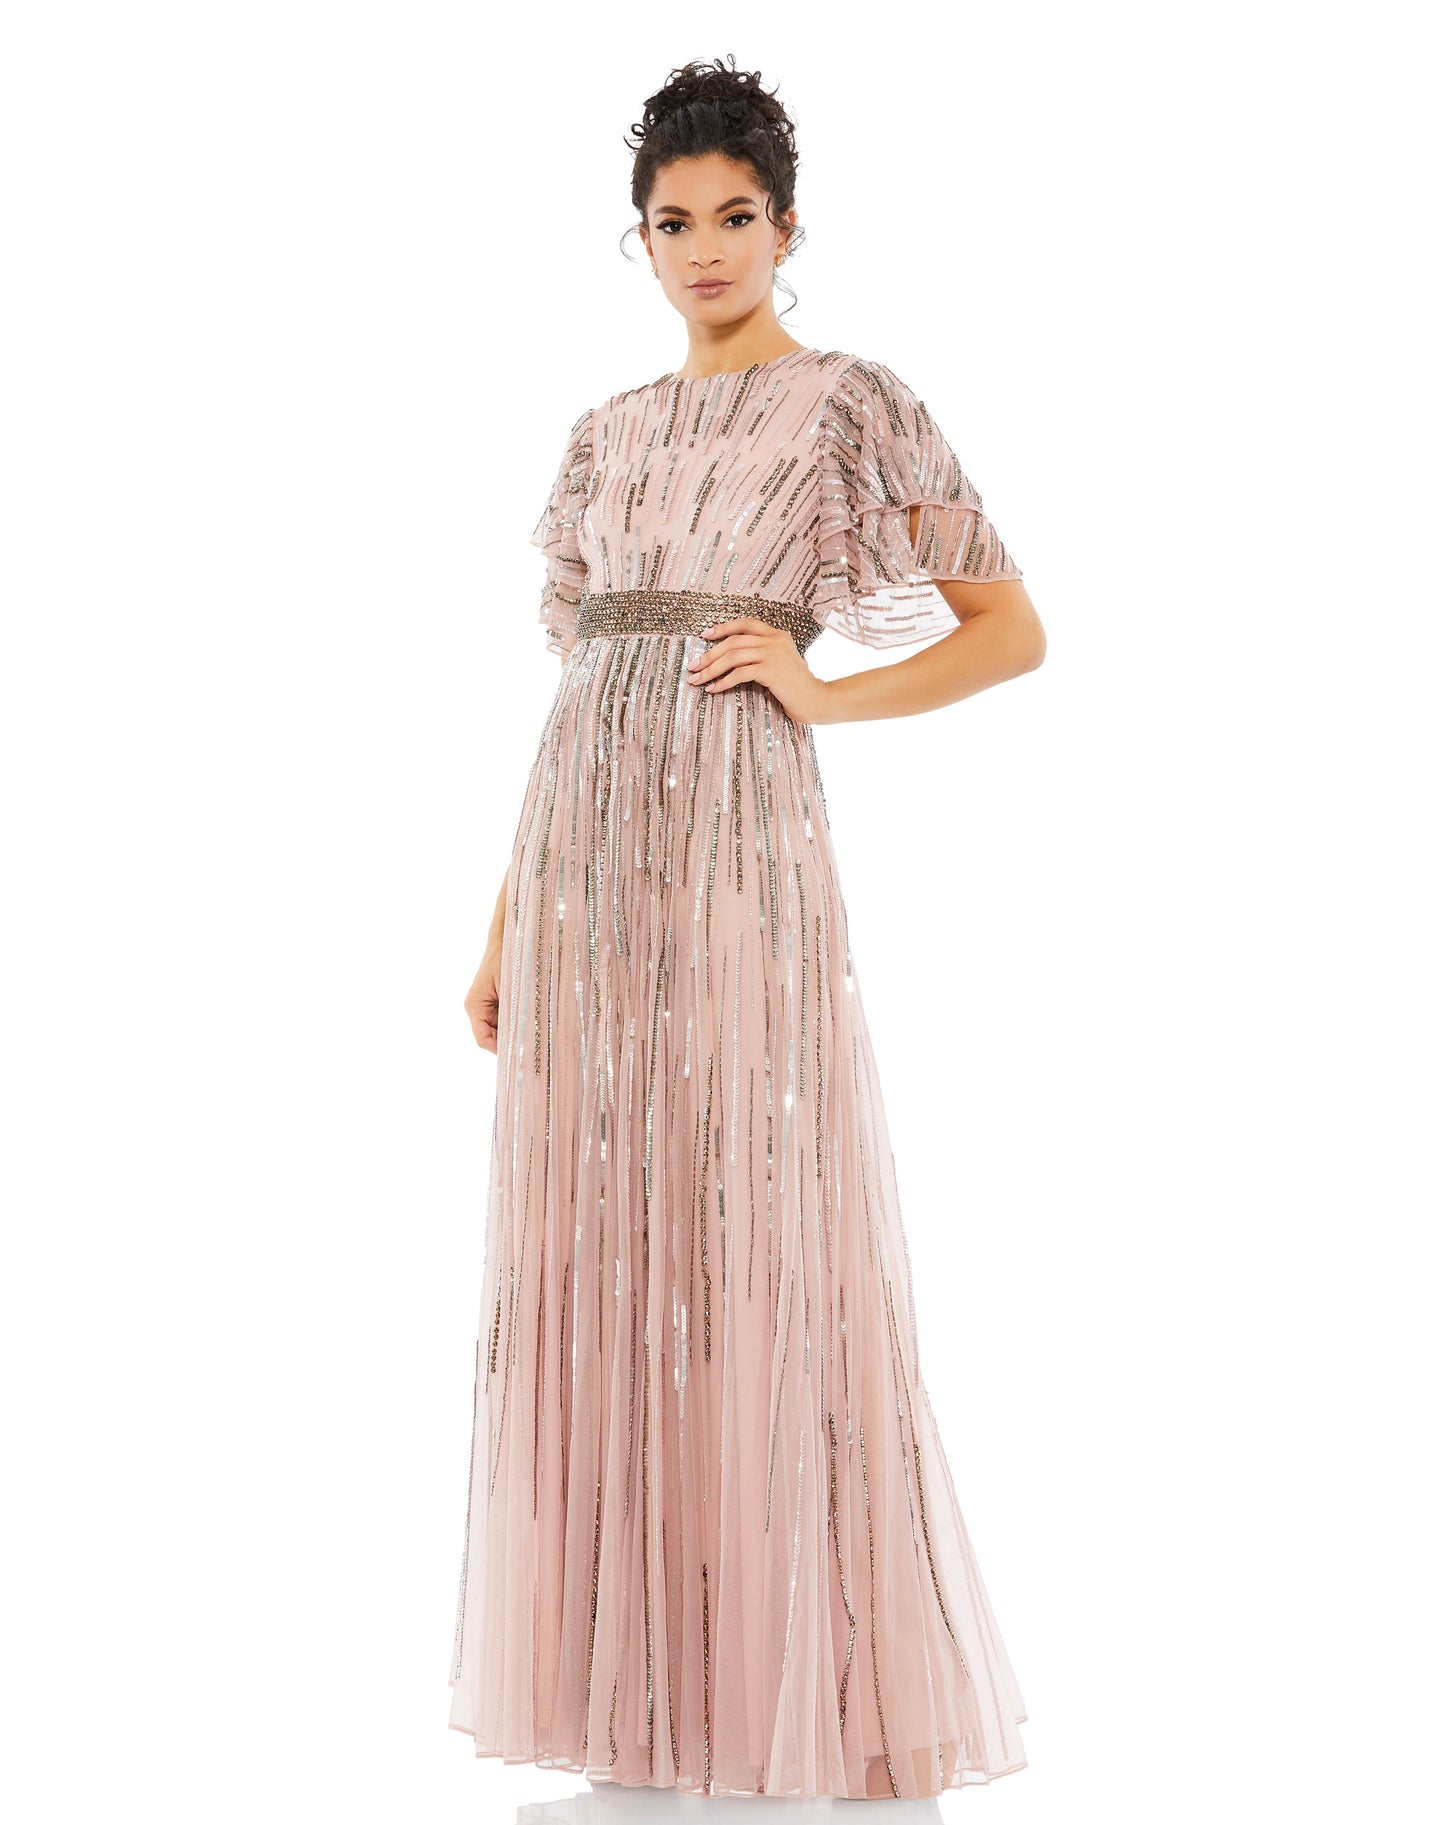 Stunning full-length gown with allover sequin and beaded stripe embellishment. Gown features a round neckline, layered short sleeves, and a dramatic bejeweled belt at the waist. Mac Duggal Fully Lined 100% Polyester High Neck Short Sleeve Maxi & Floor Len